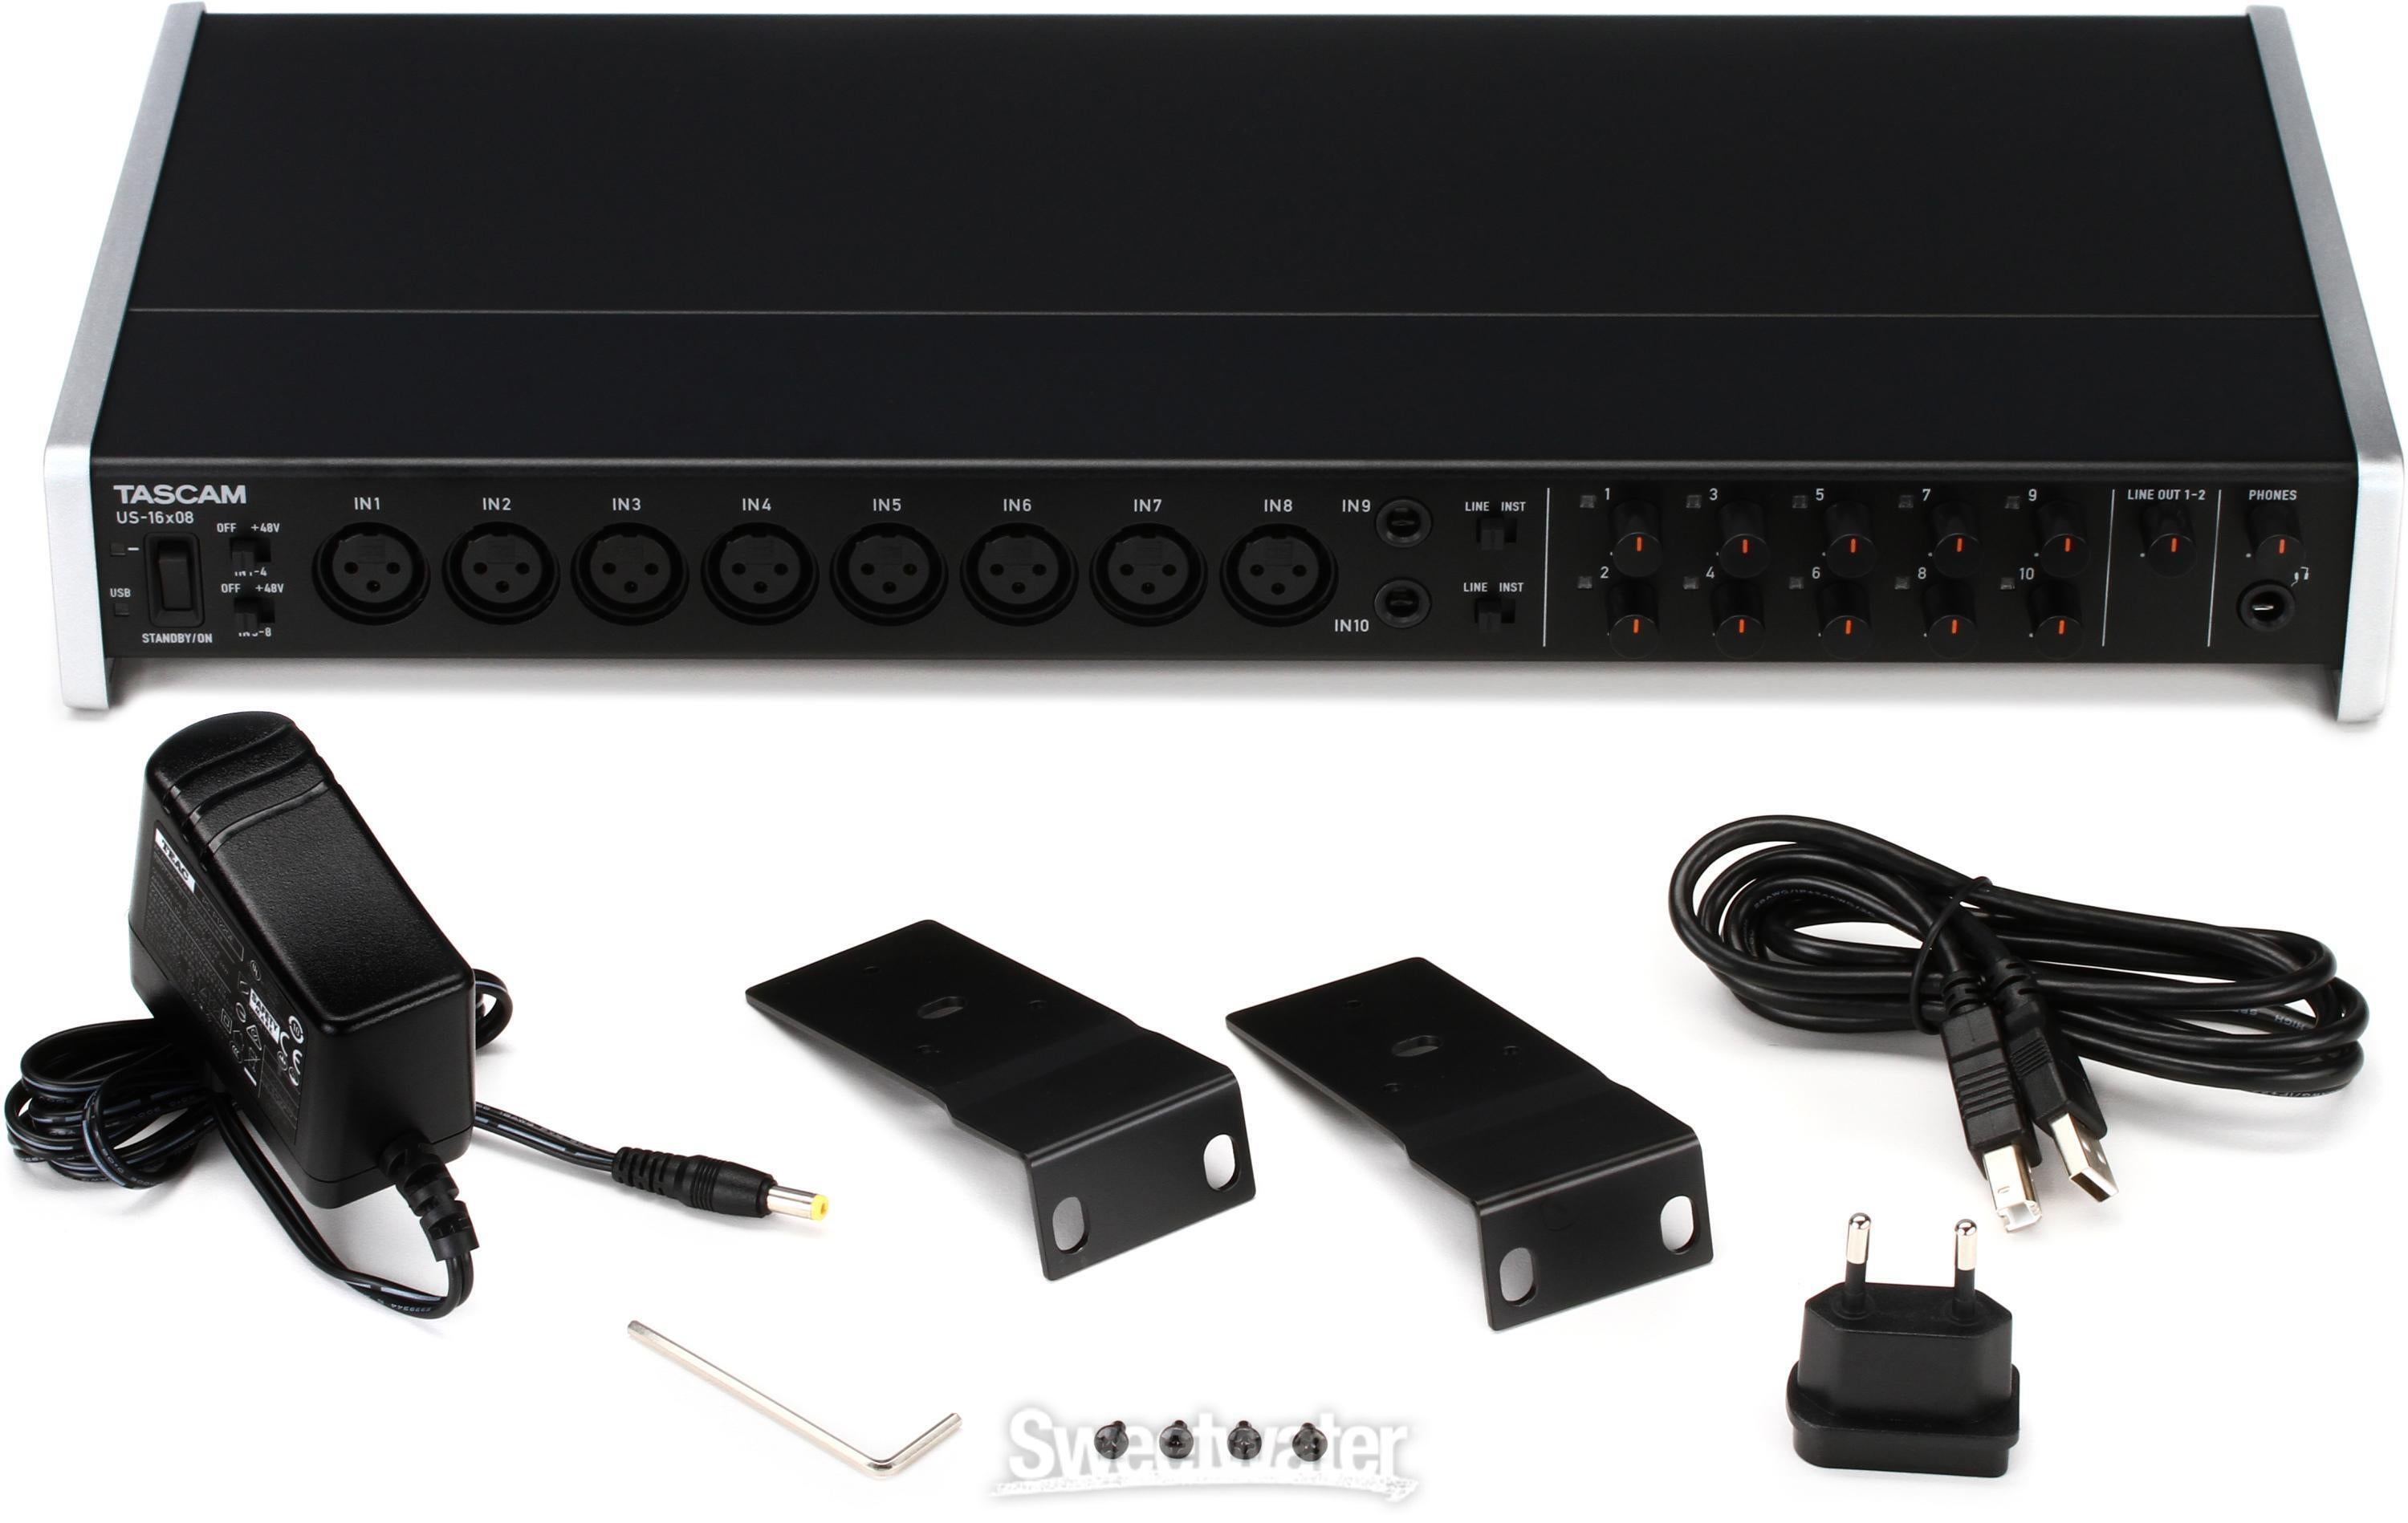 TASCAM US-16x08 USB Audio Interface | Sweetwater